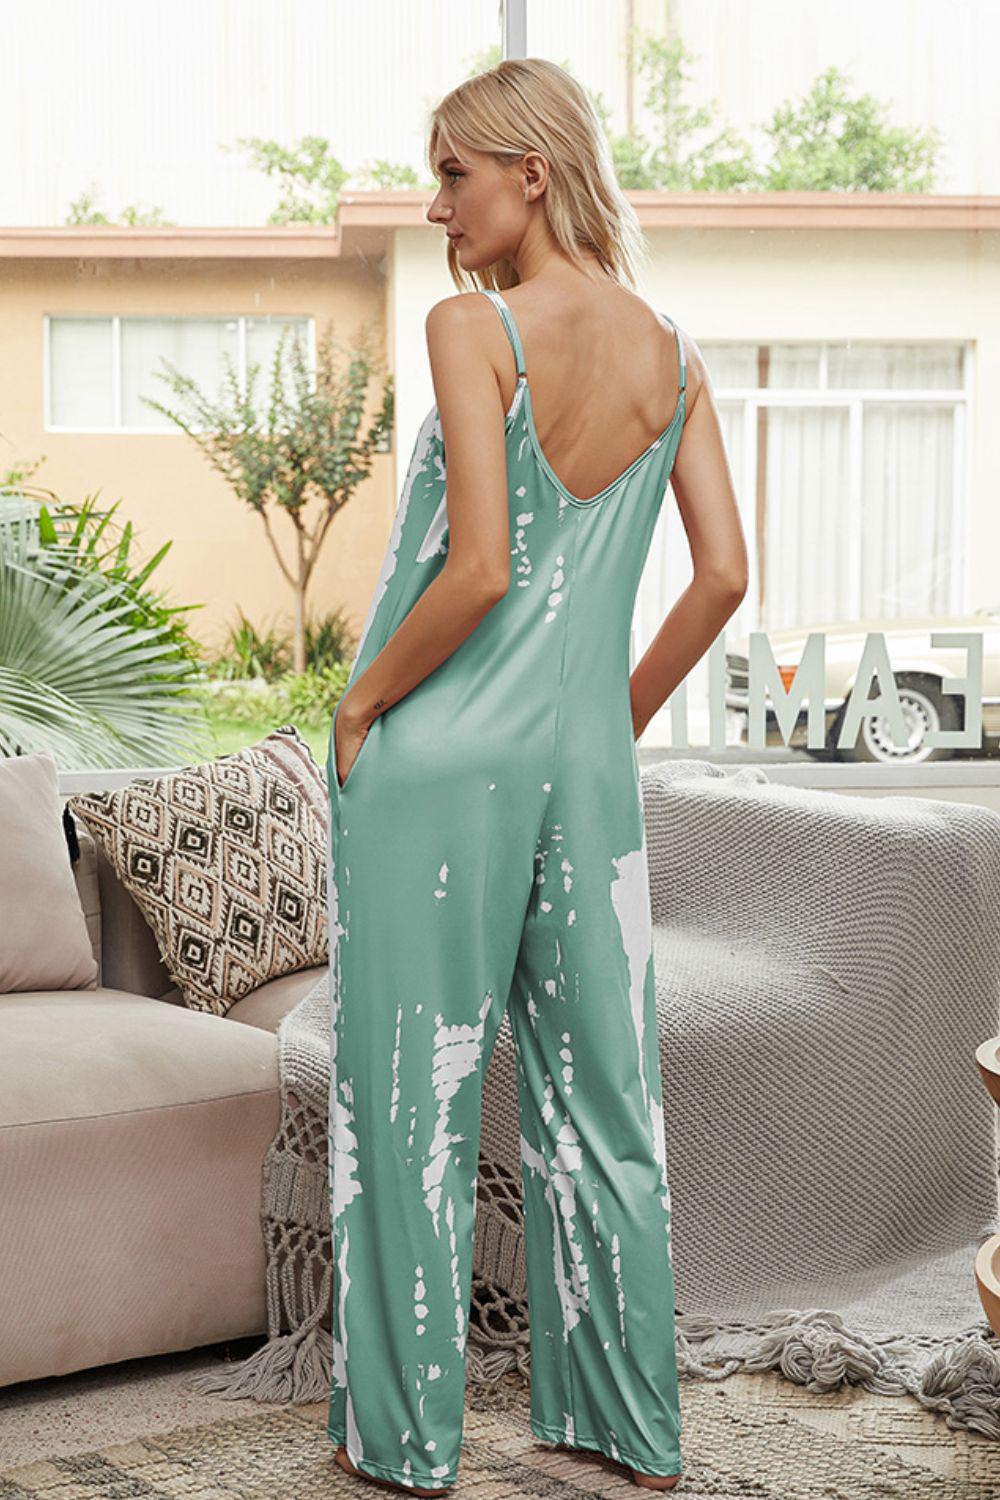 Tie-Dye Spaghetti Strap Jumpsuit with Pockets BLUE ZONE PLANET